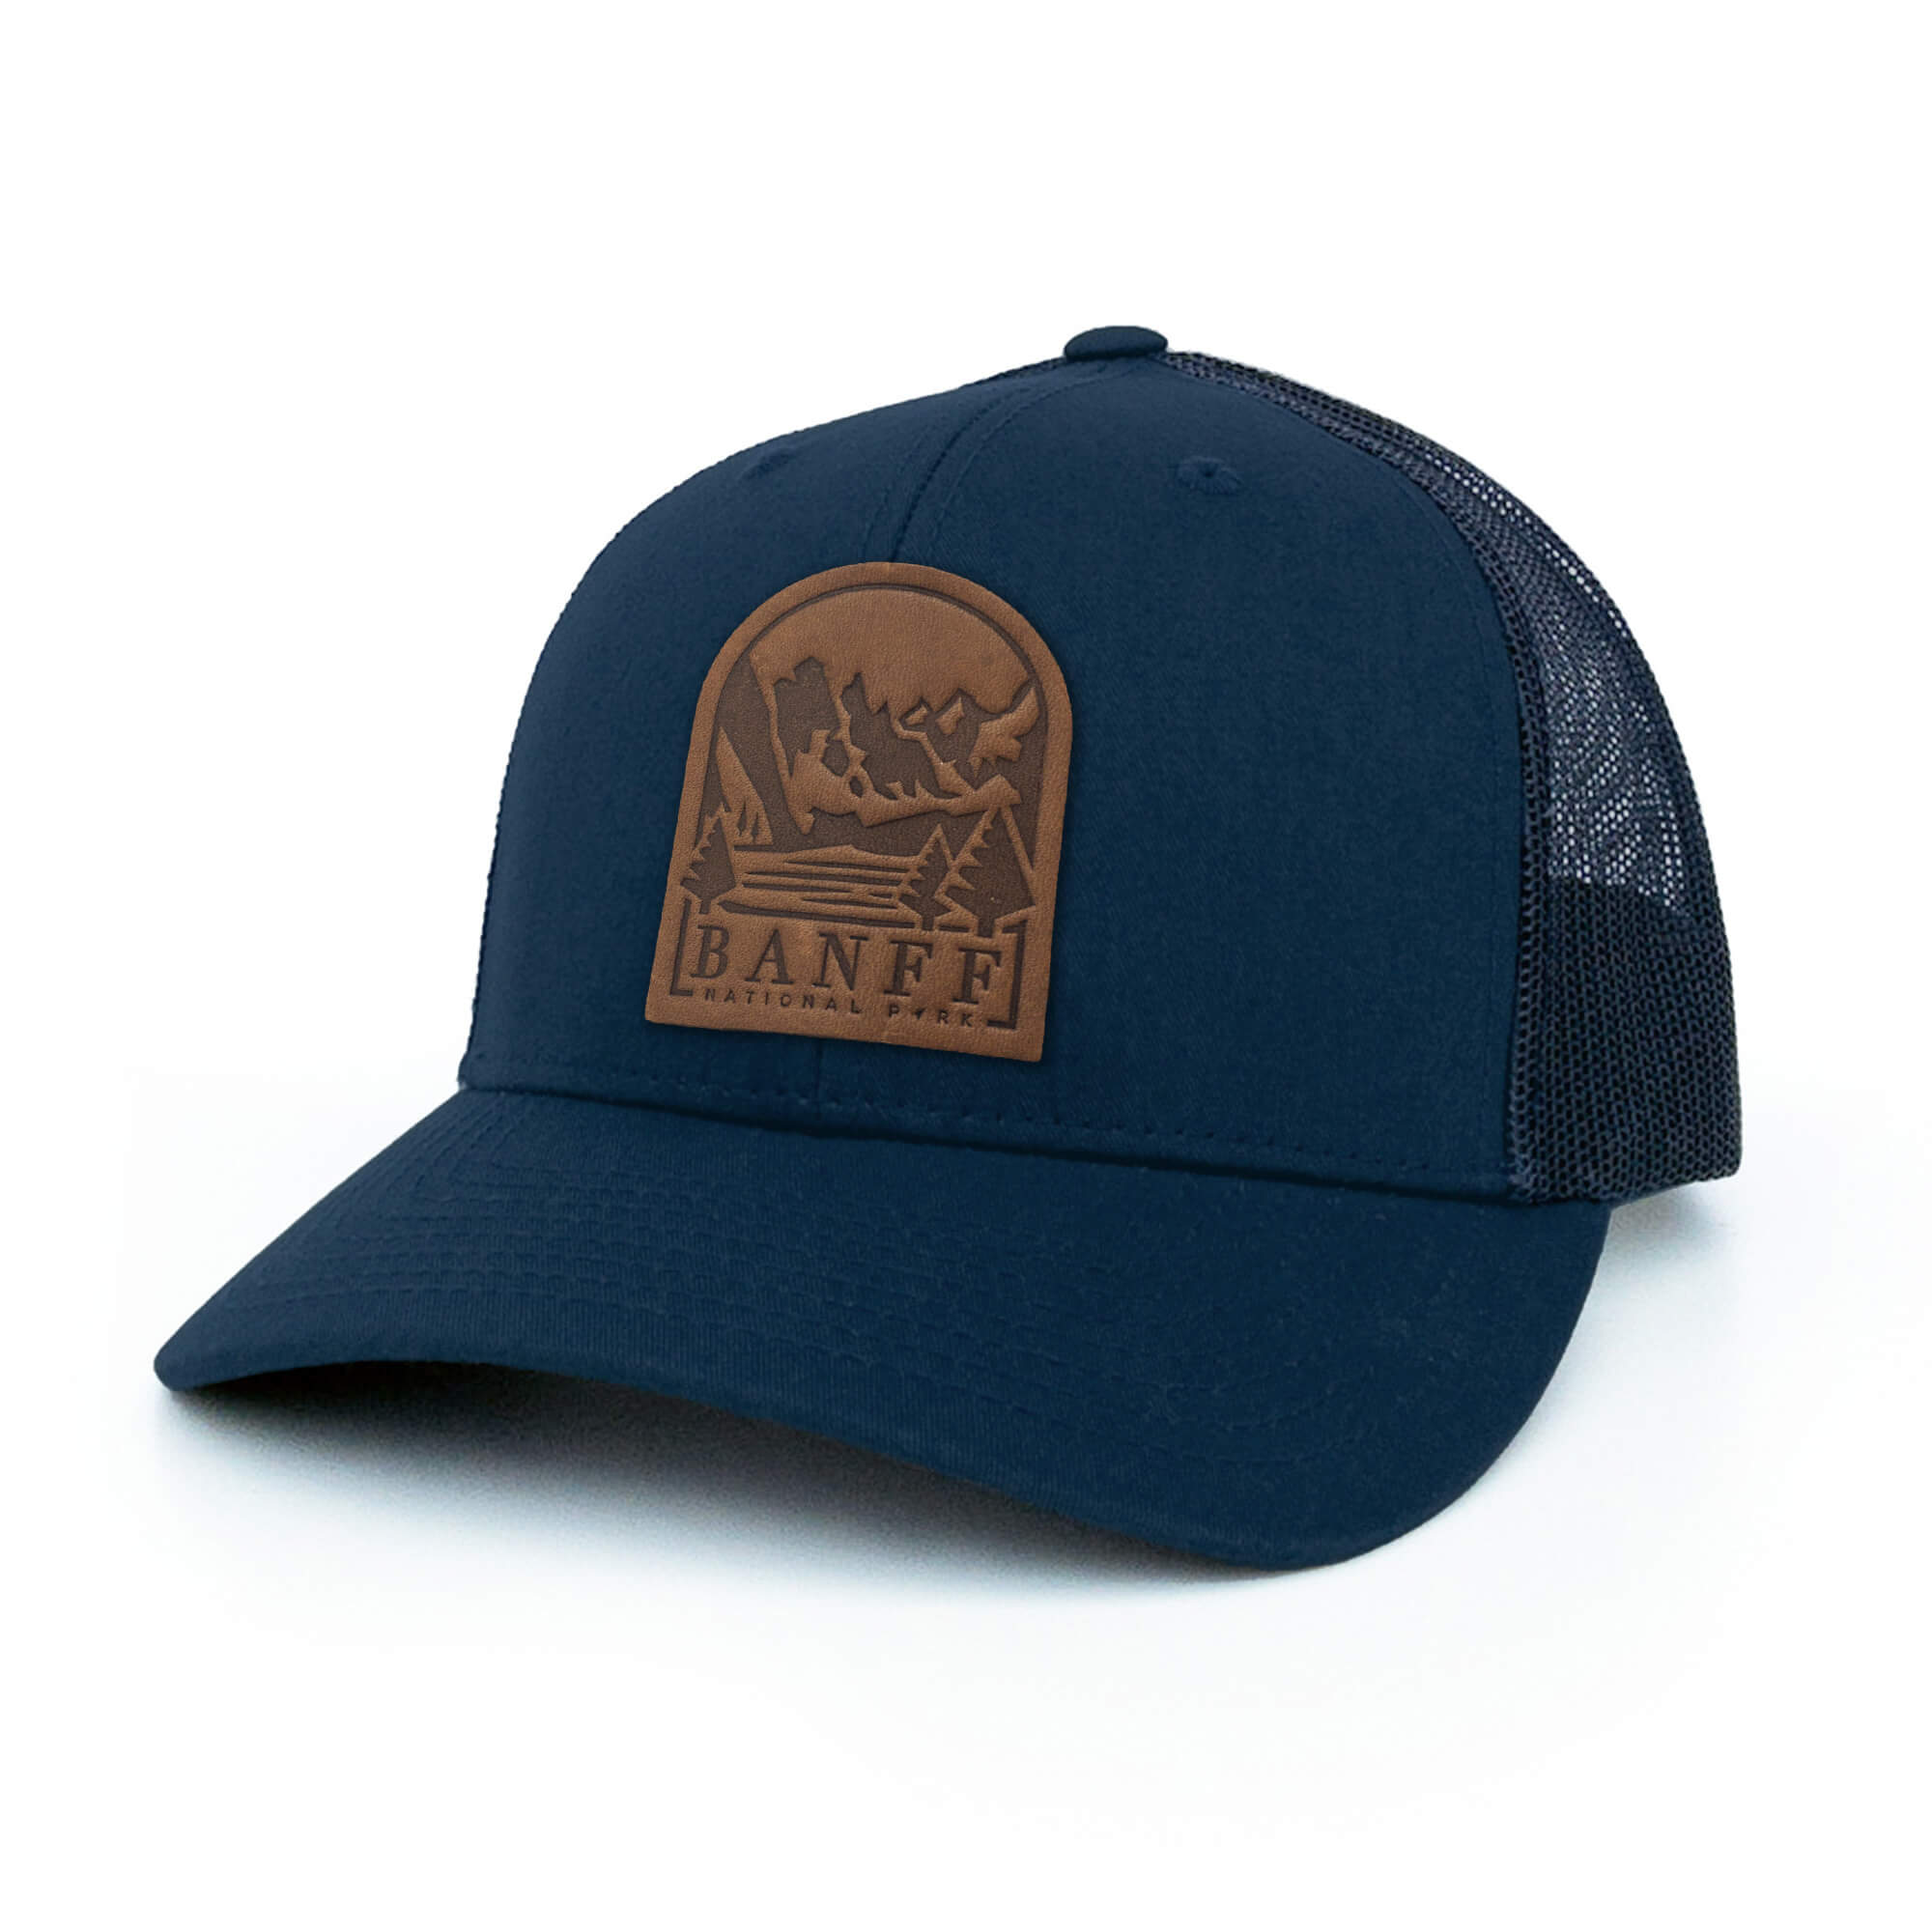 Navy trucker hat with full-grain leather patch of Banff National Park | BLACK-007-001, CHARC-007-001, NAVY-007-001, HGREY-007-001, MOSS-007-001, BROWN-007-001